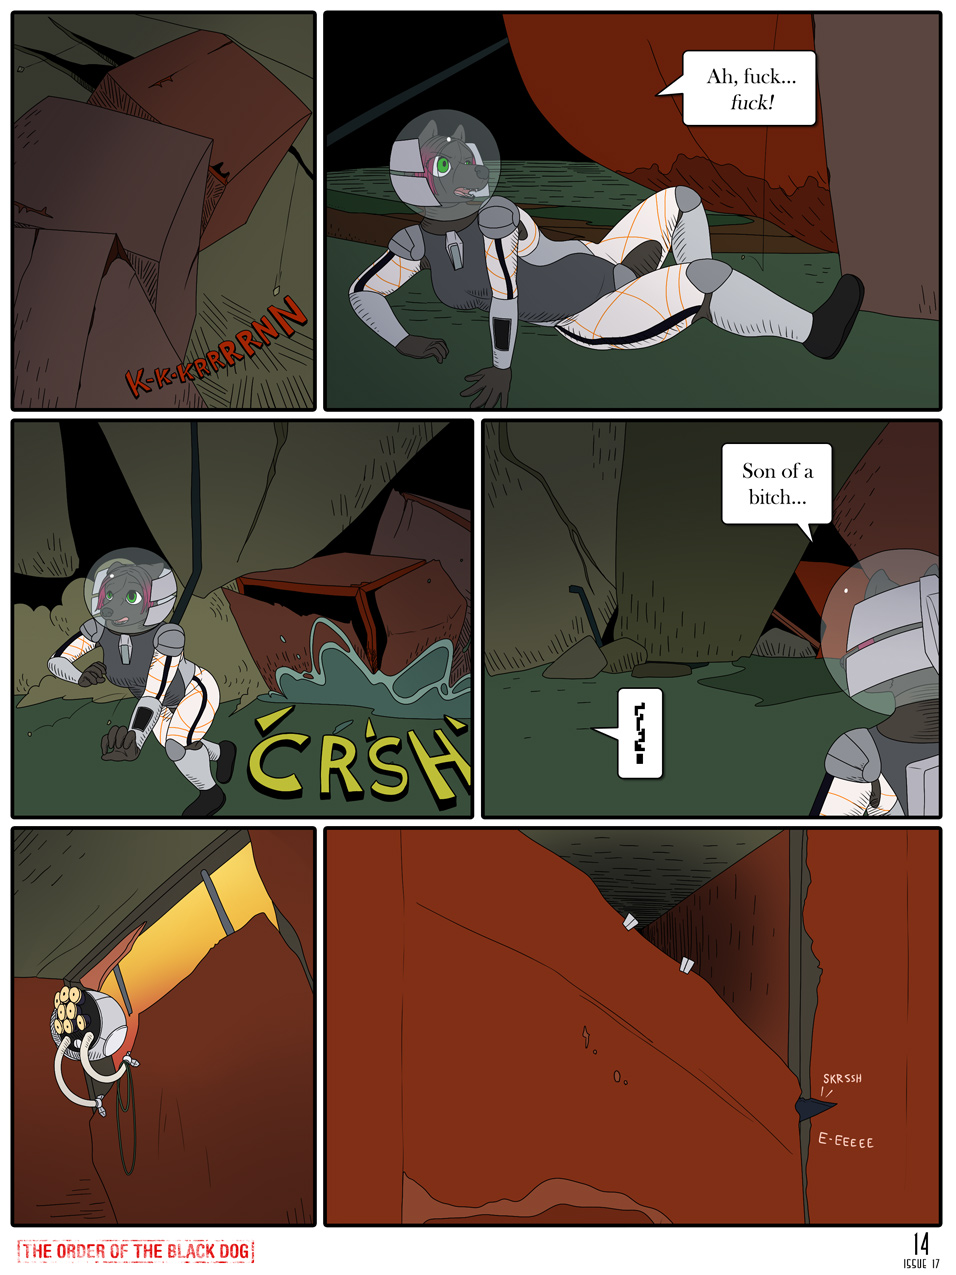 Issue 17, Page 14